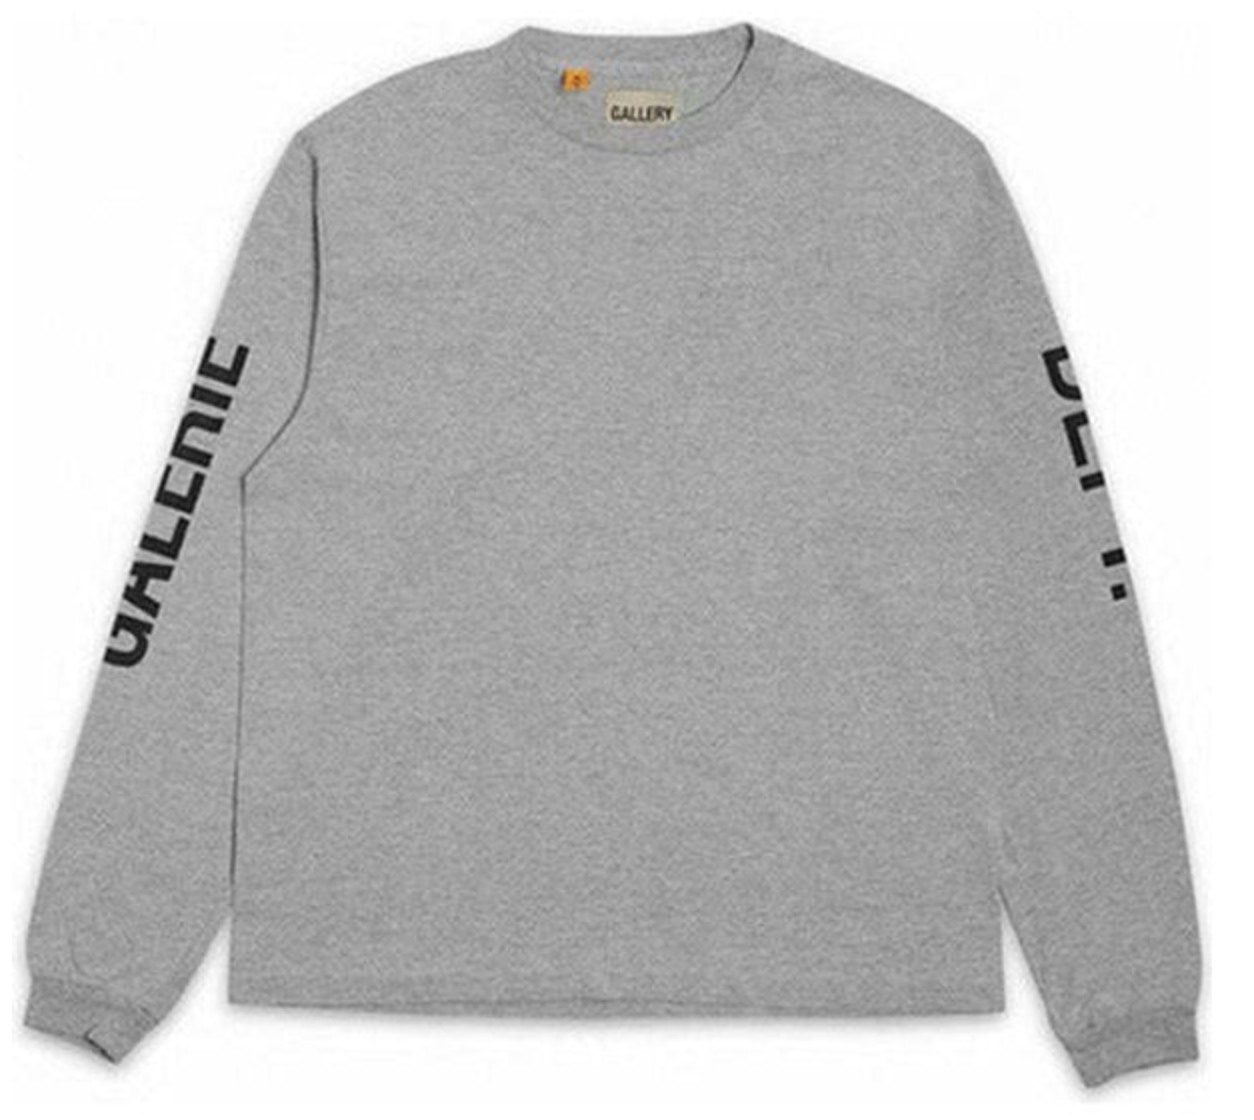 Gallery Dept. French Collector L/S Grey/Black PALISADES